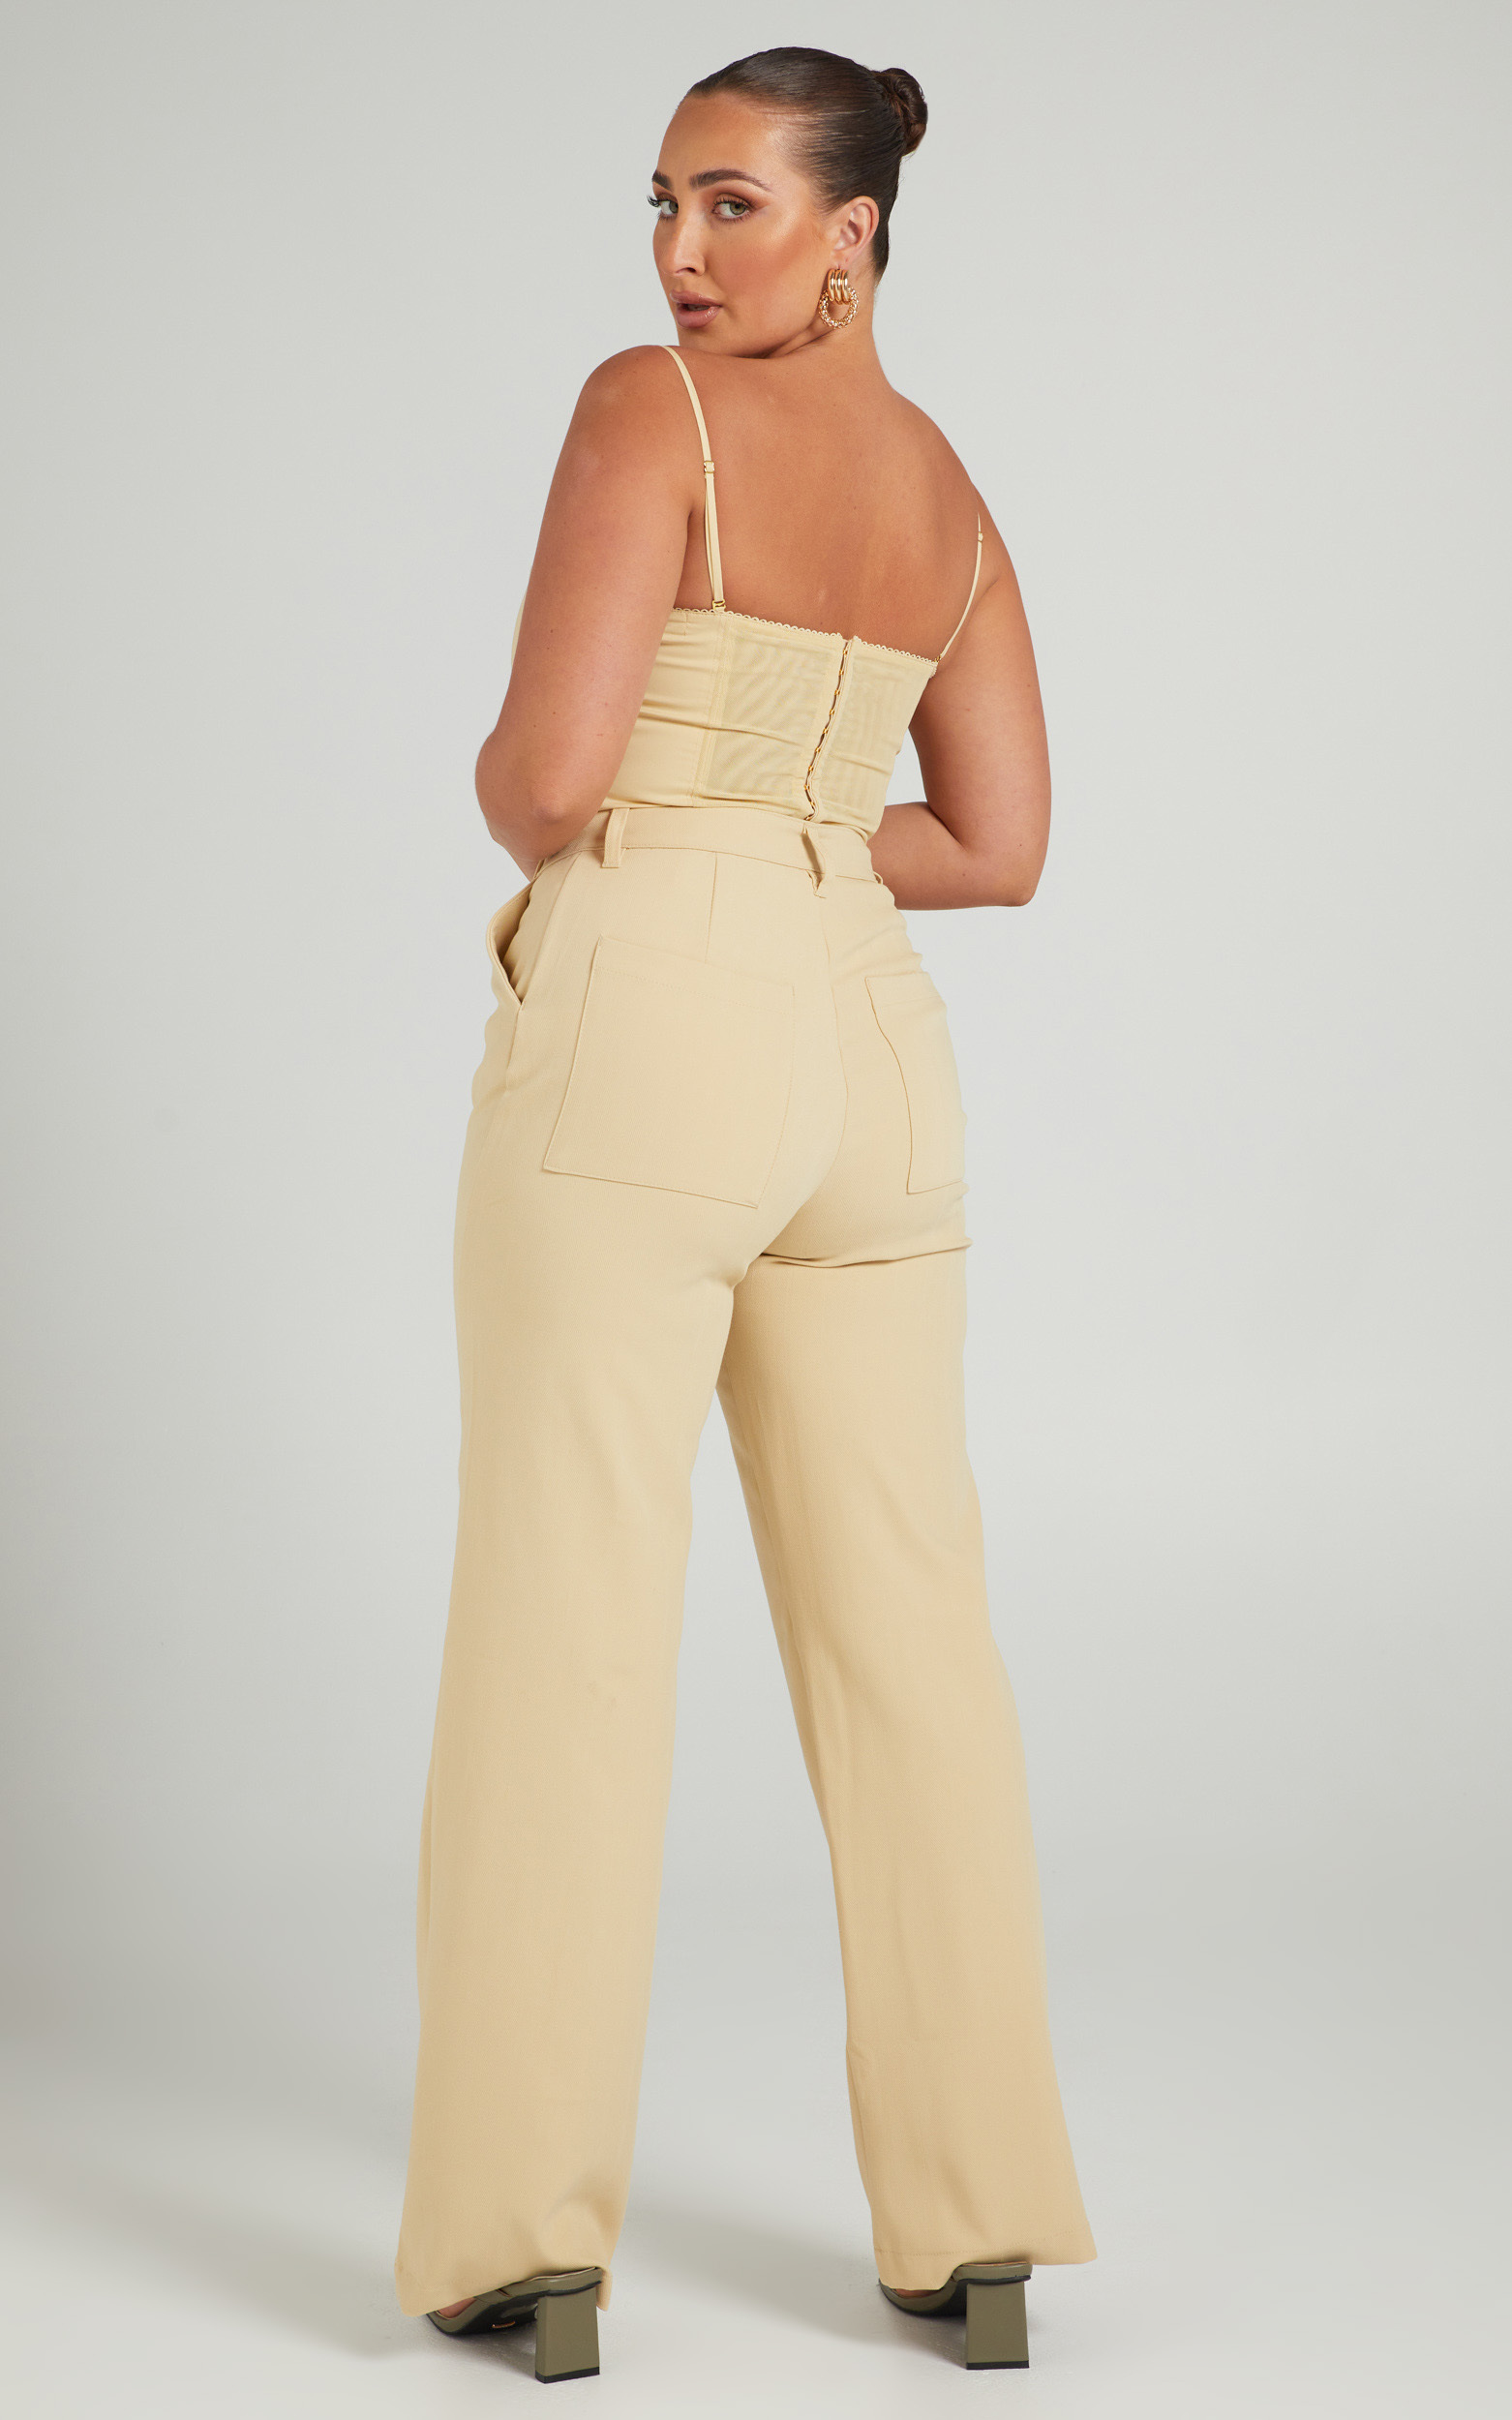 Danielle Bernstein - Classic Trouser in Taupe - 06, BRN1, hi-res image number null